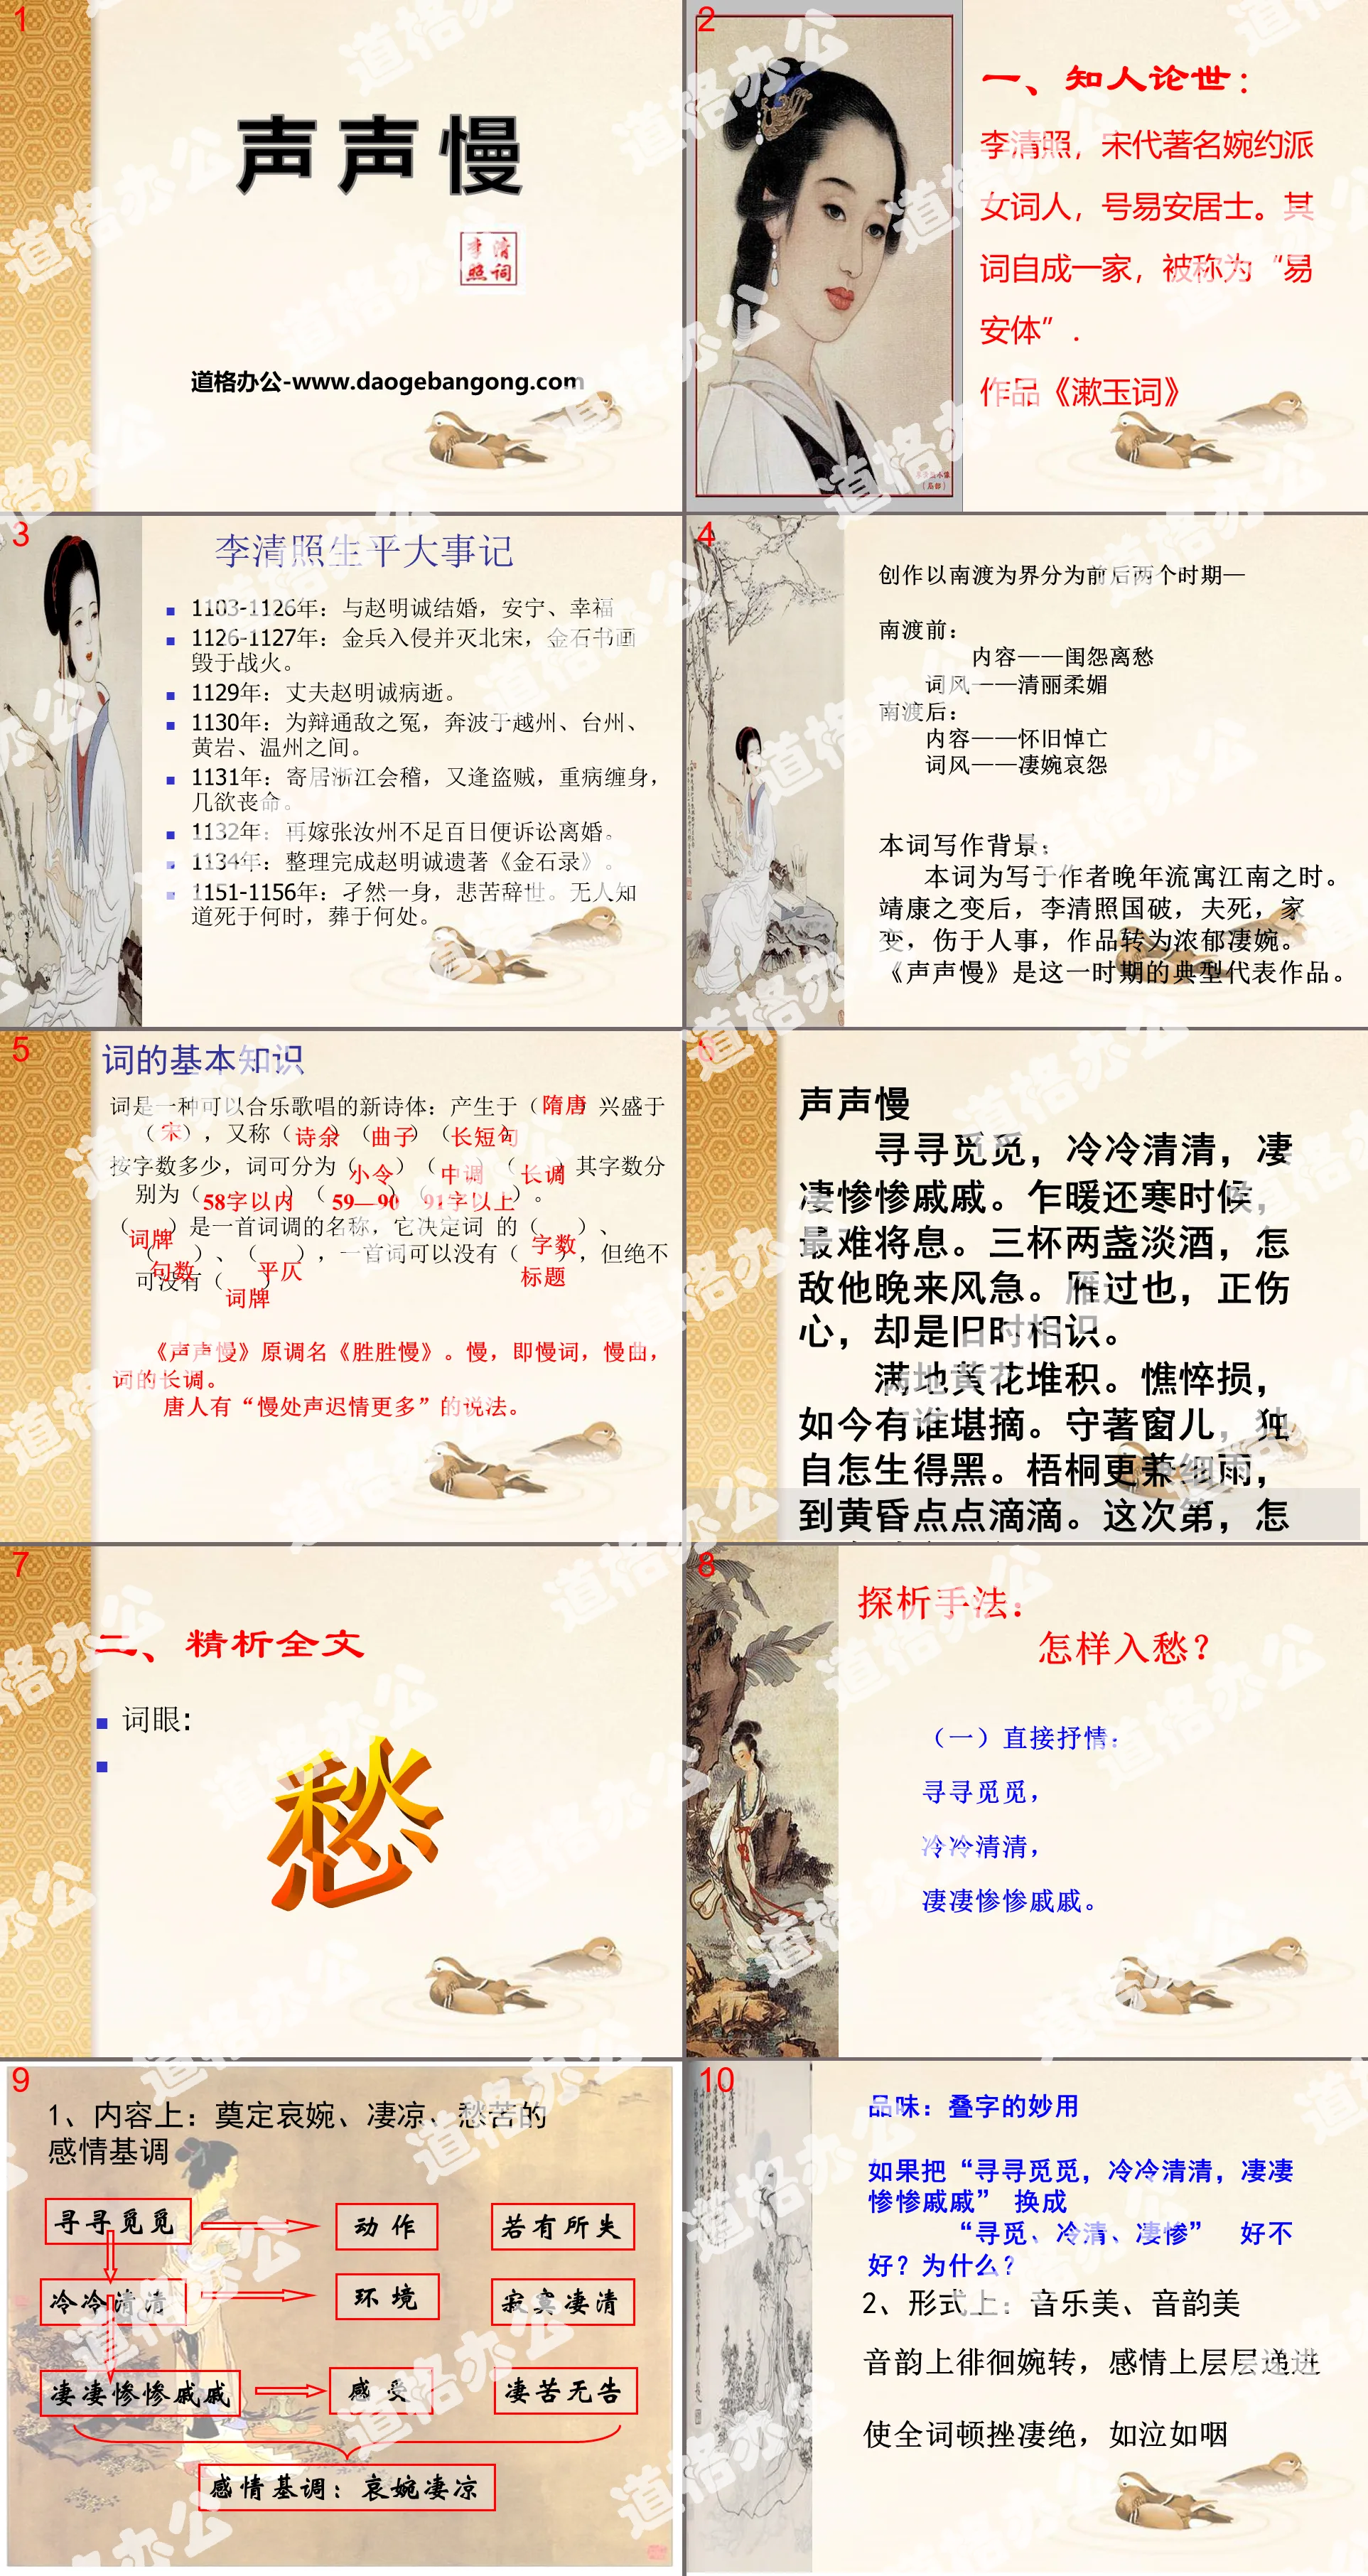 "Slow Voice" PPT of two lyrics by Li Qingzhao